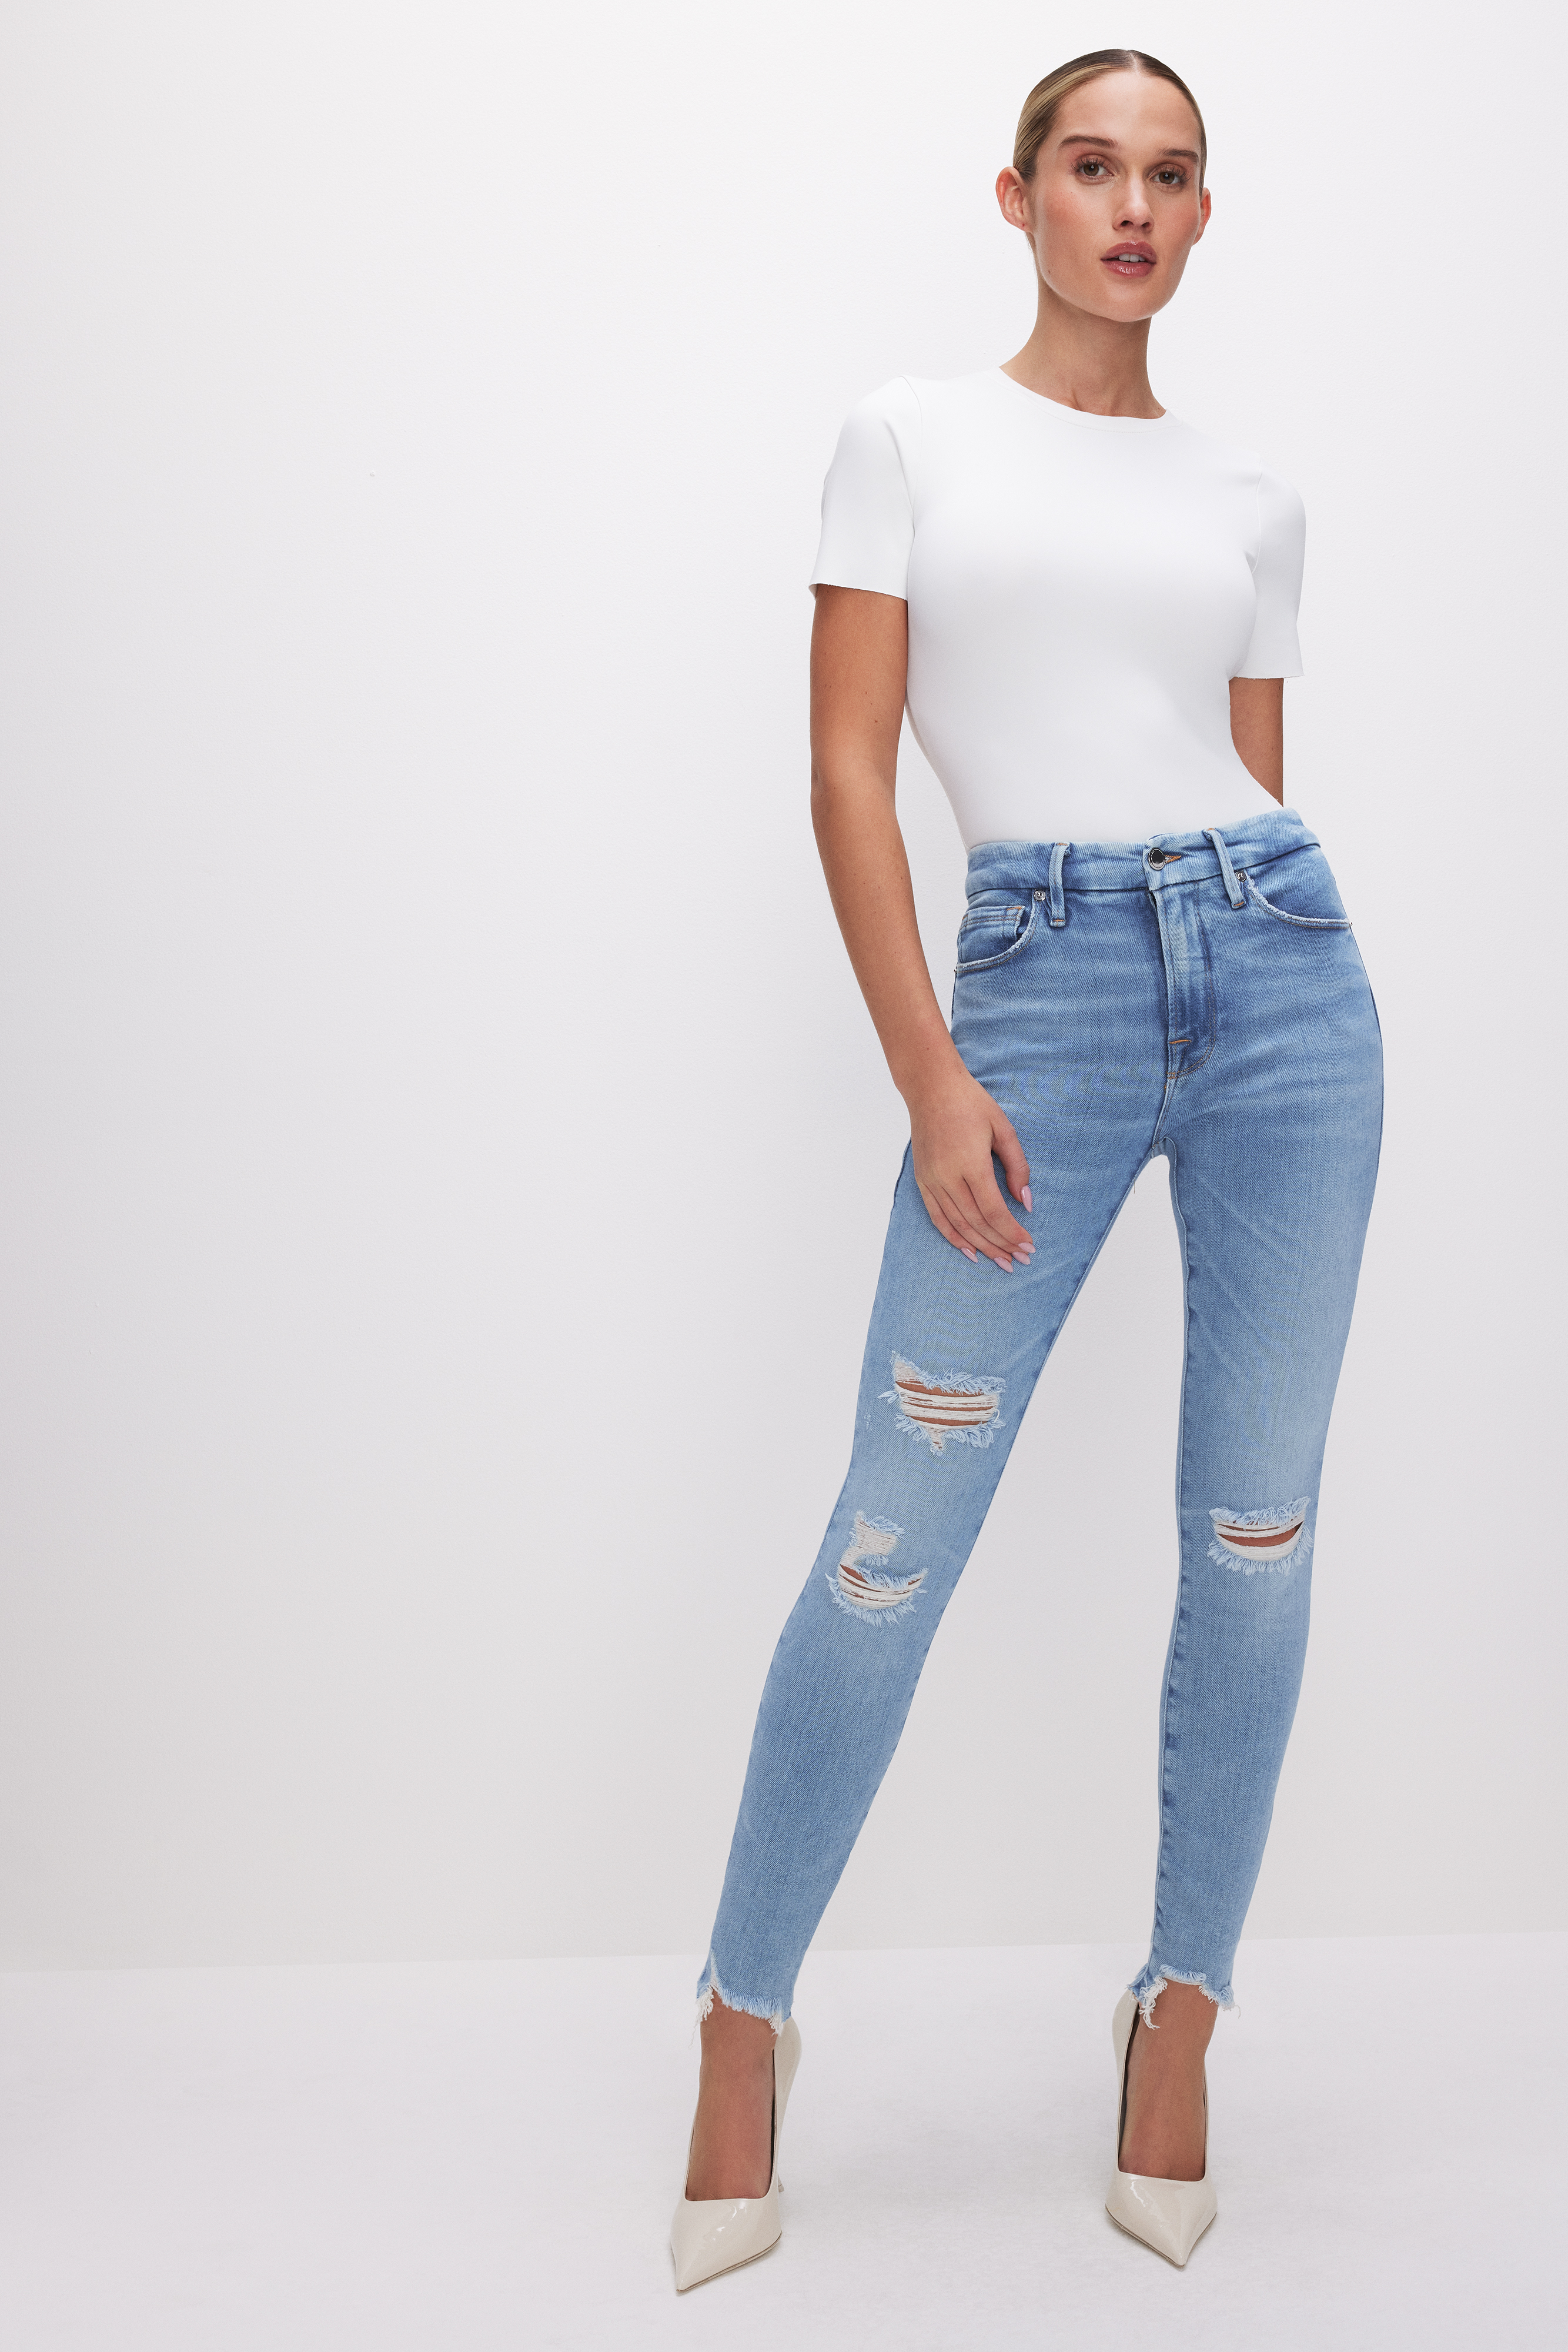 Styled with GOOD LEGS SKINNY JEANS | BLUE833